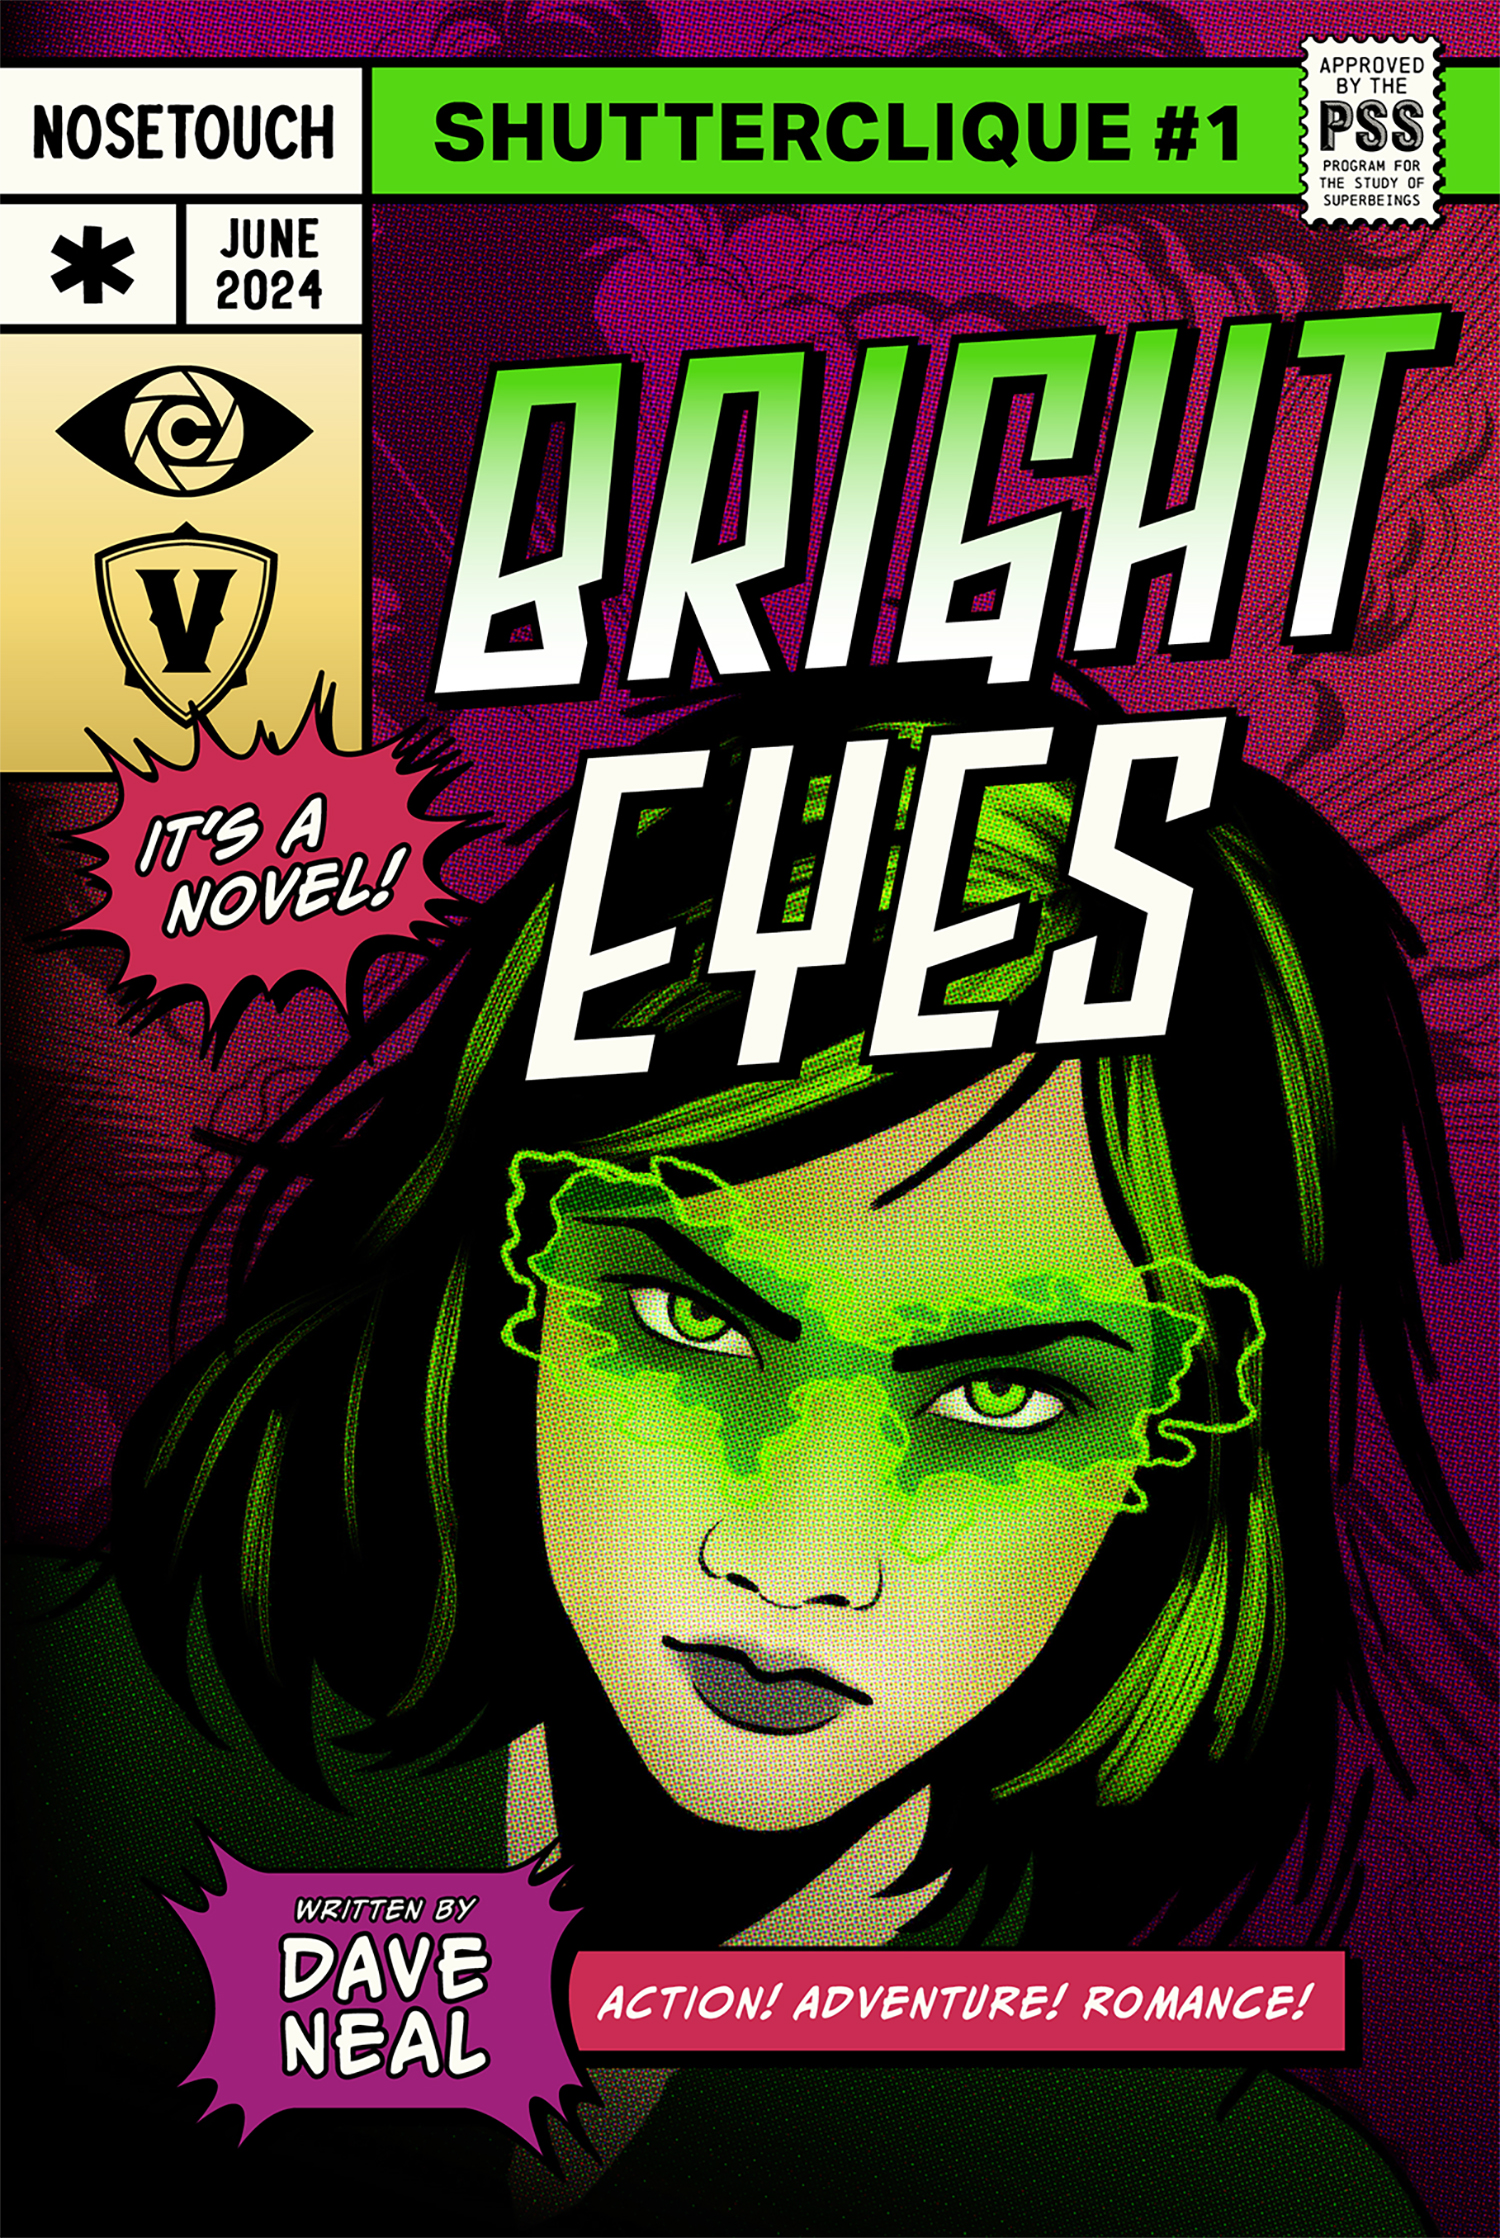 Brighteyes-The Shutterclique Book 1-Dave Neal